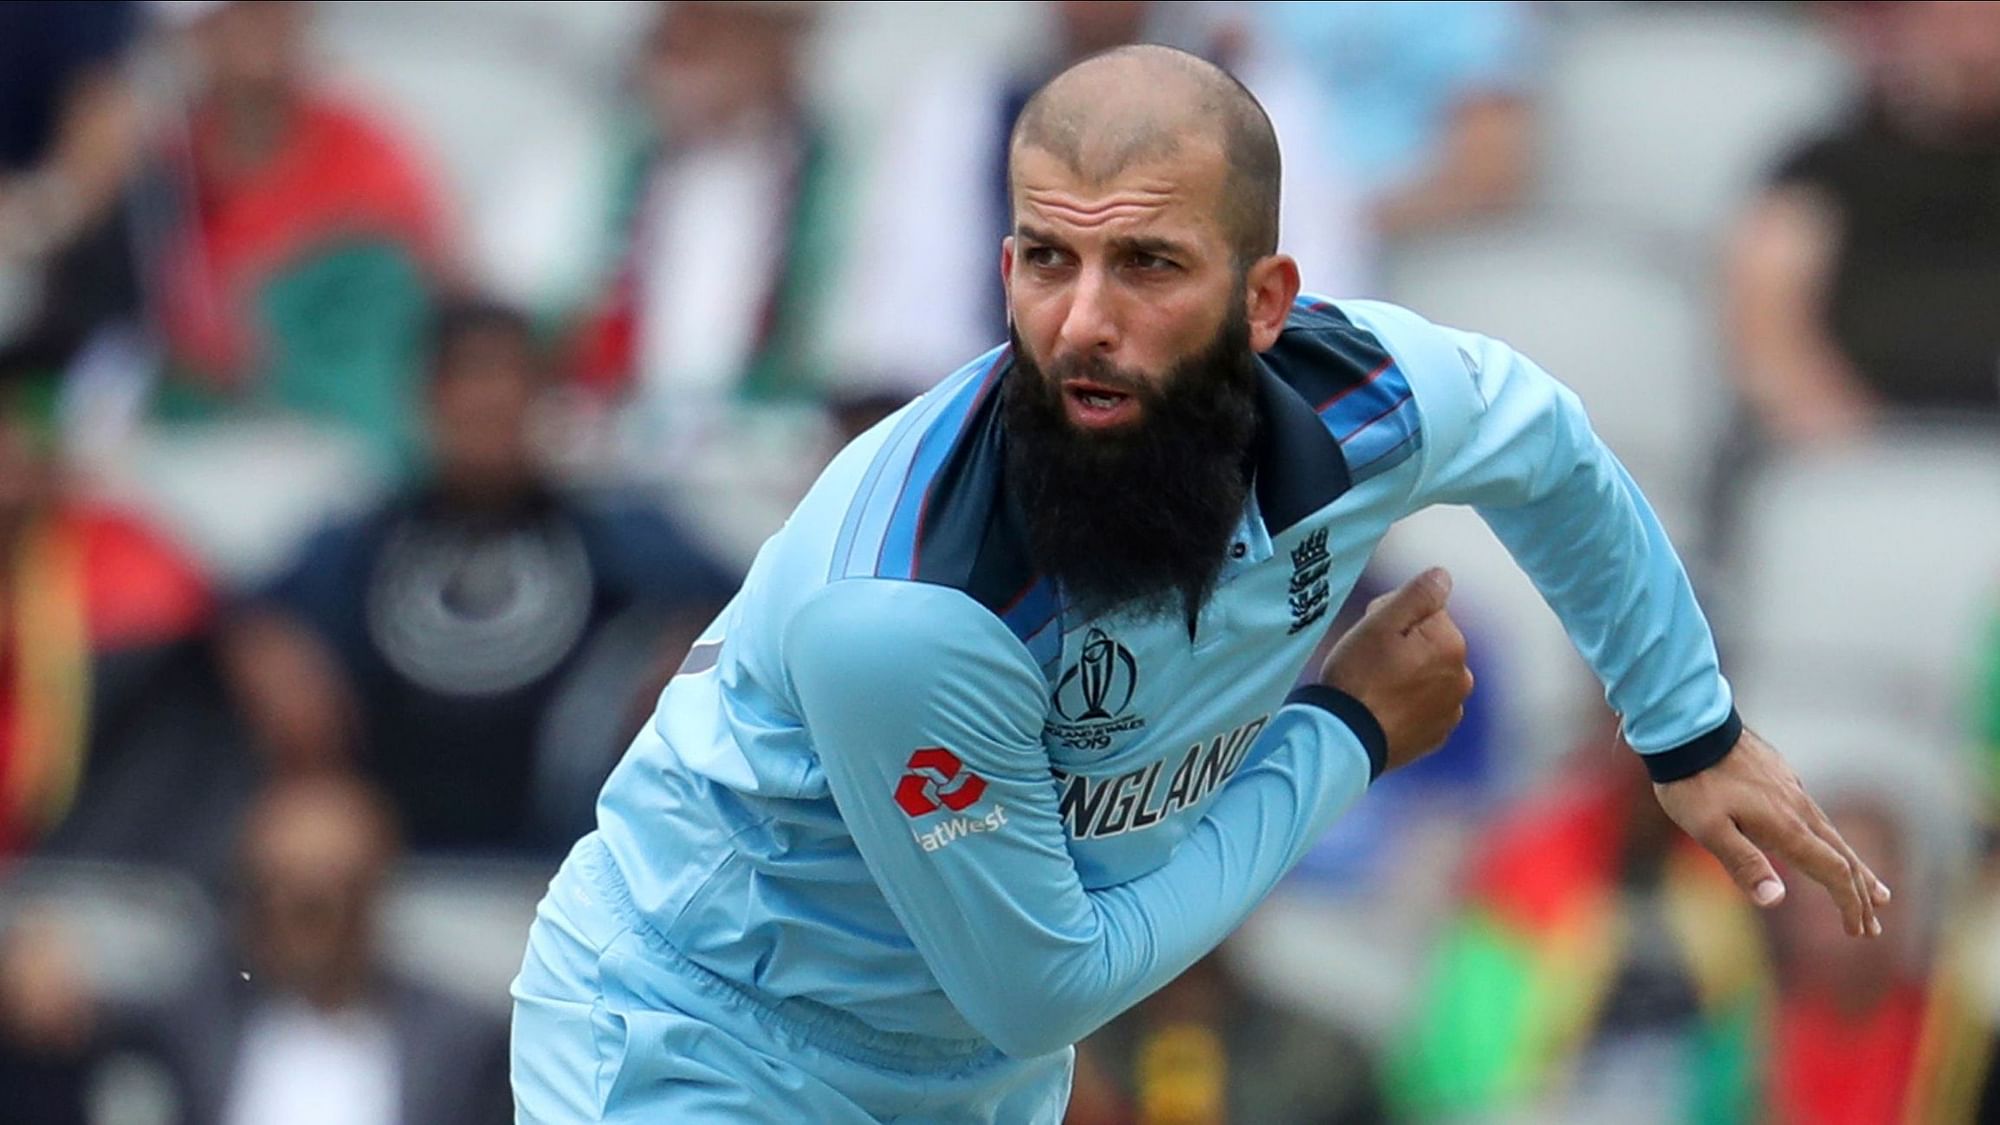 Moeen Ali is preparing to play his 100th ODI on Friday against Sri Lanka.